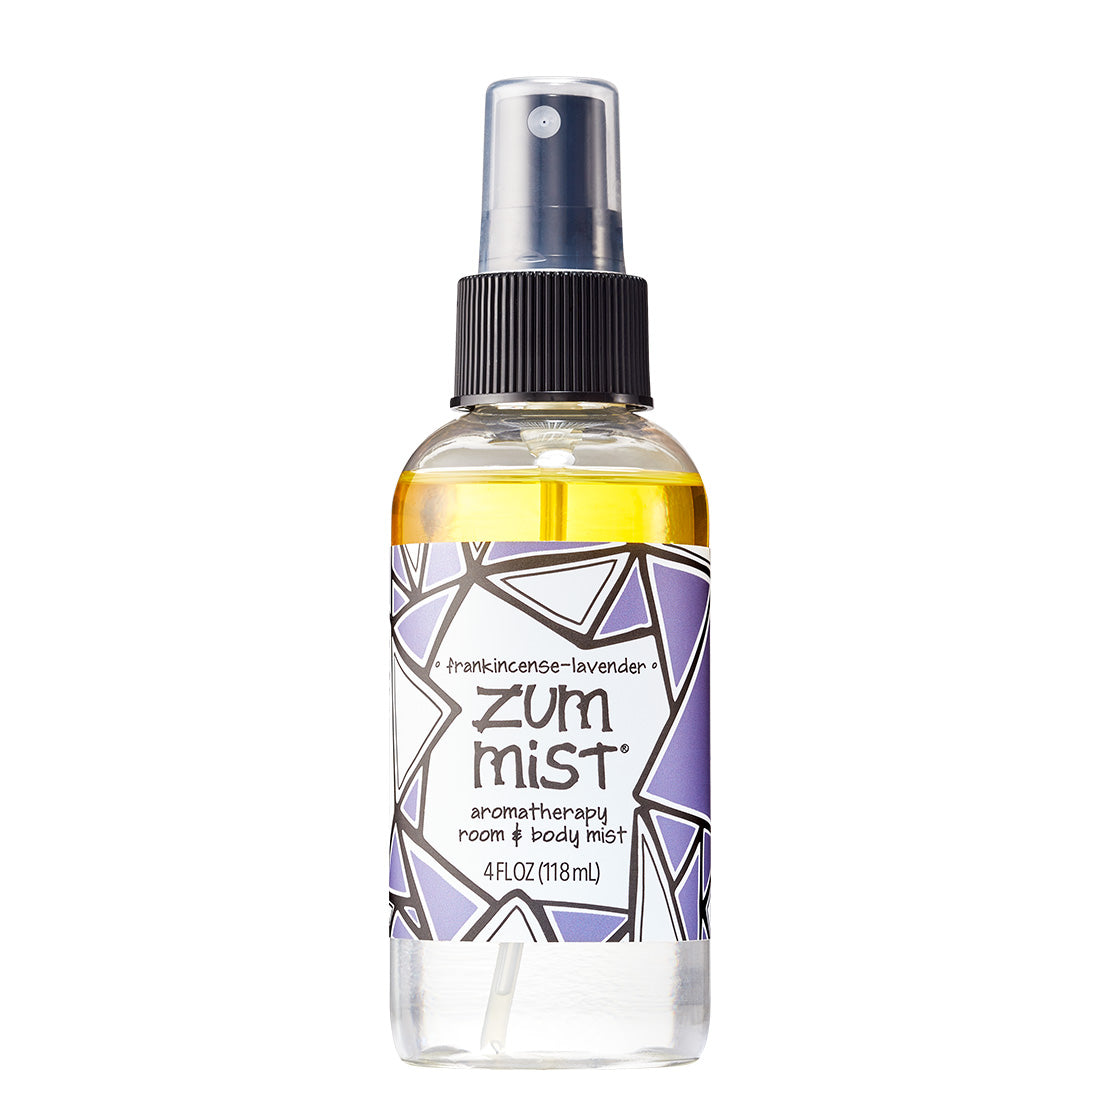 Labeled Aromatherapy Room & Body Mist bottle with a sprayer in the scent Frankincense-Lavender.